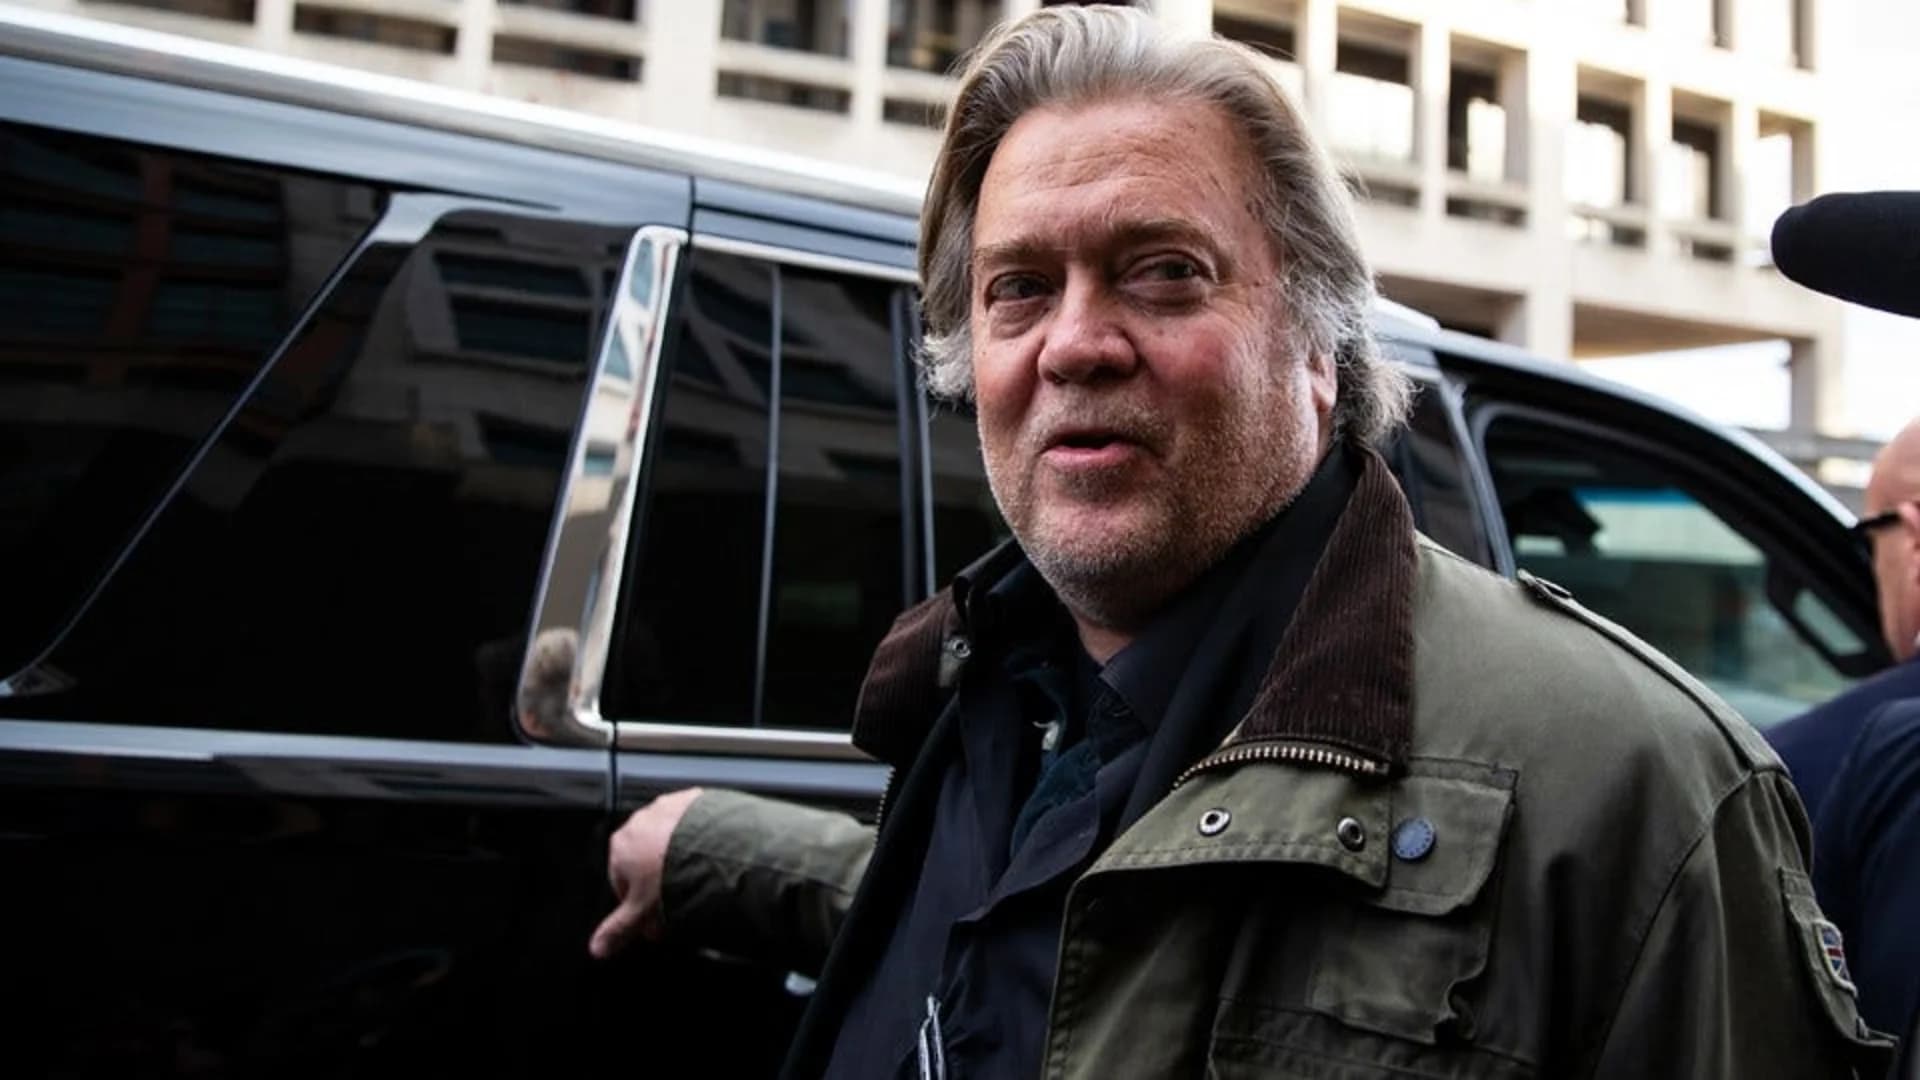 Ex-Trump aide Bannon pleads not guilty in border wall scheme